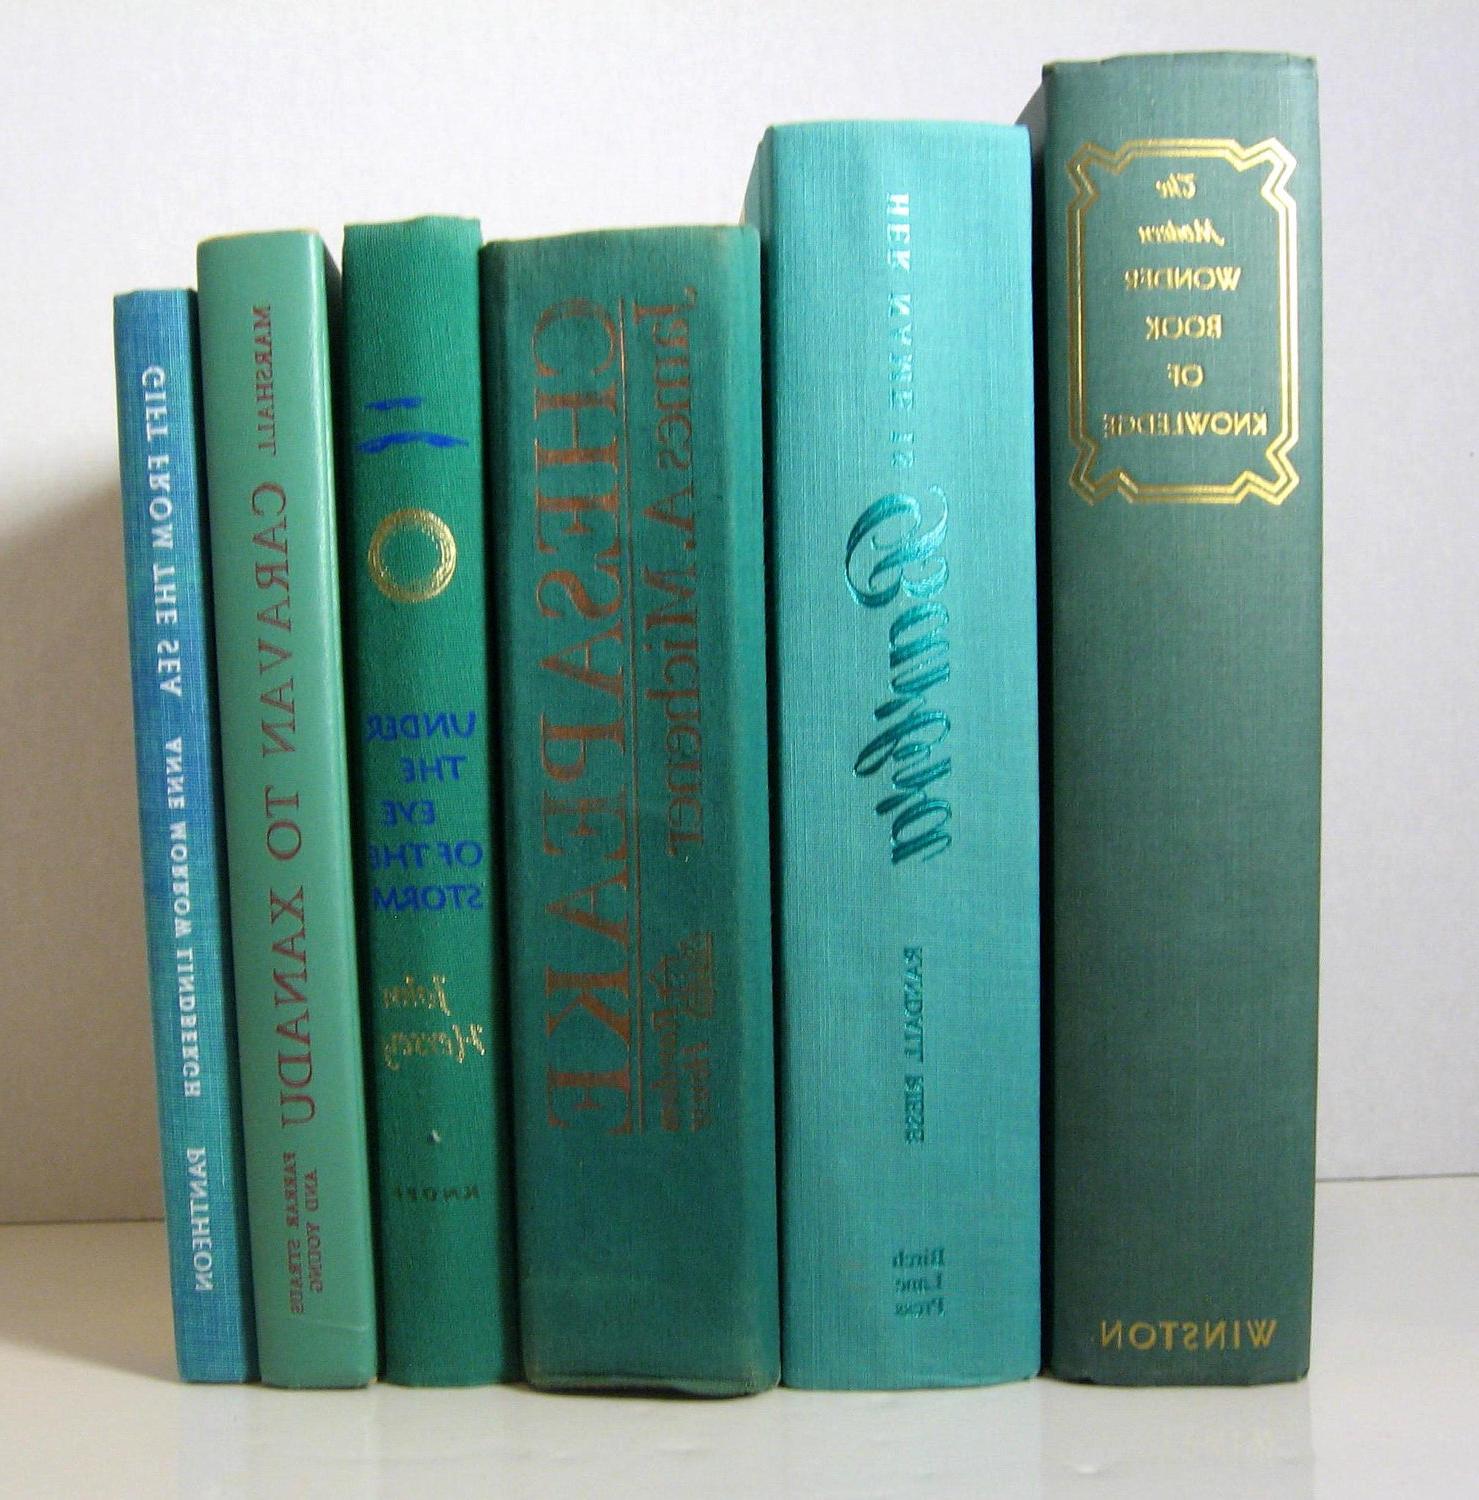 Vintage Instant Book Decor Collection of Teal Blue, Turquoise and Green